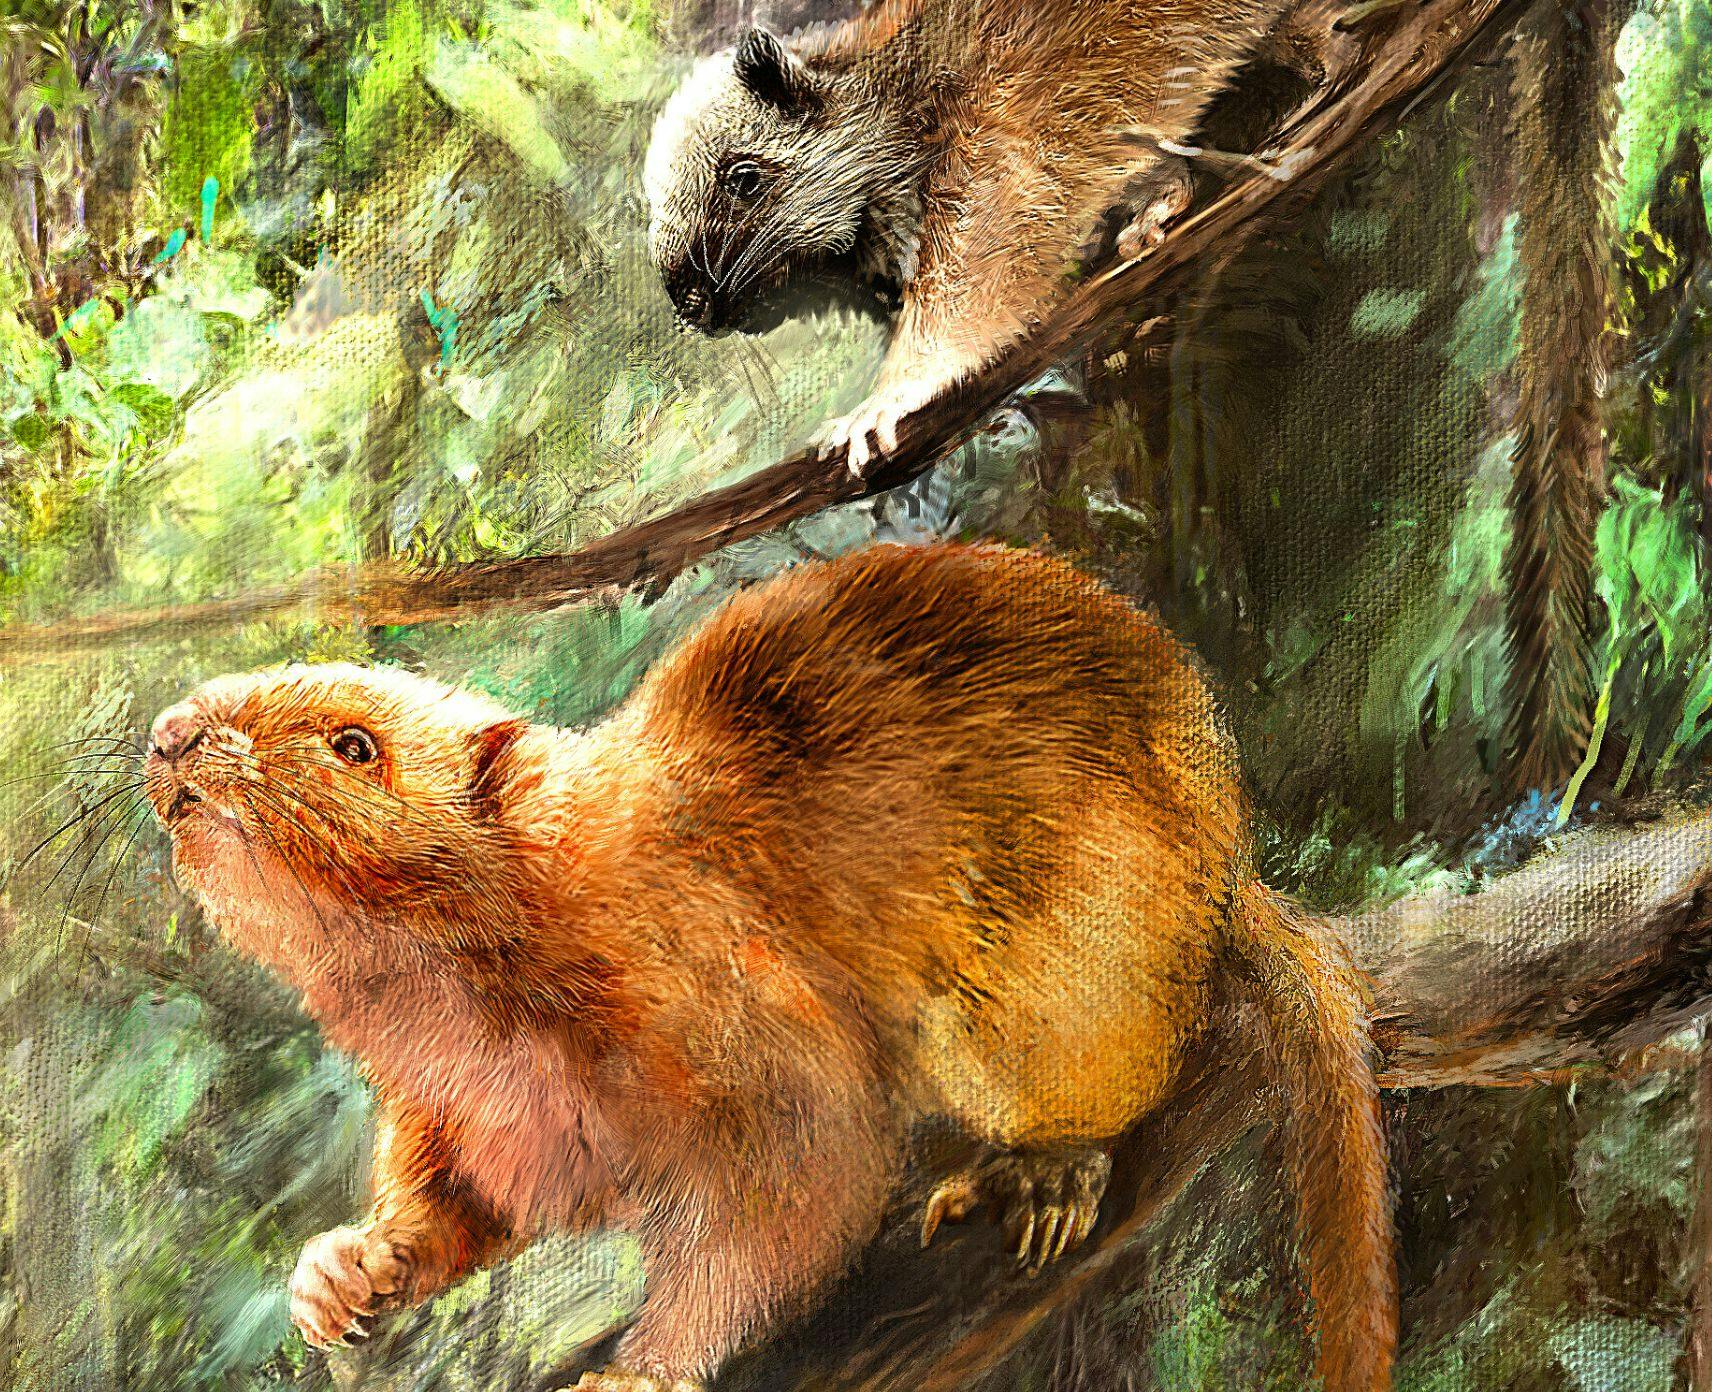 Artist's rendering of two giant cloud rats in a tree.